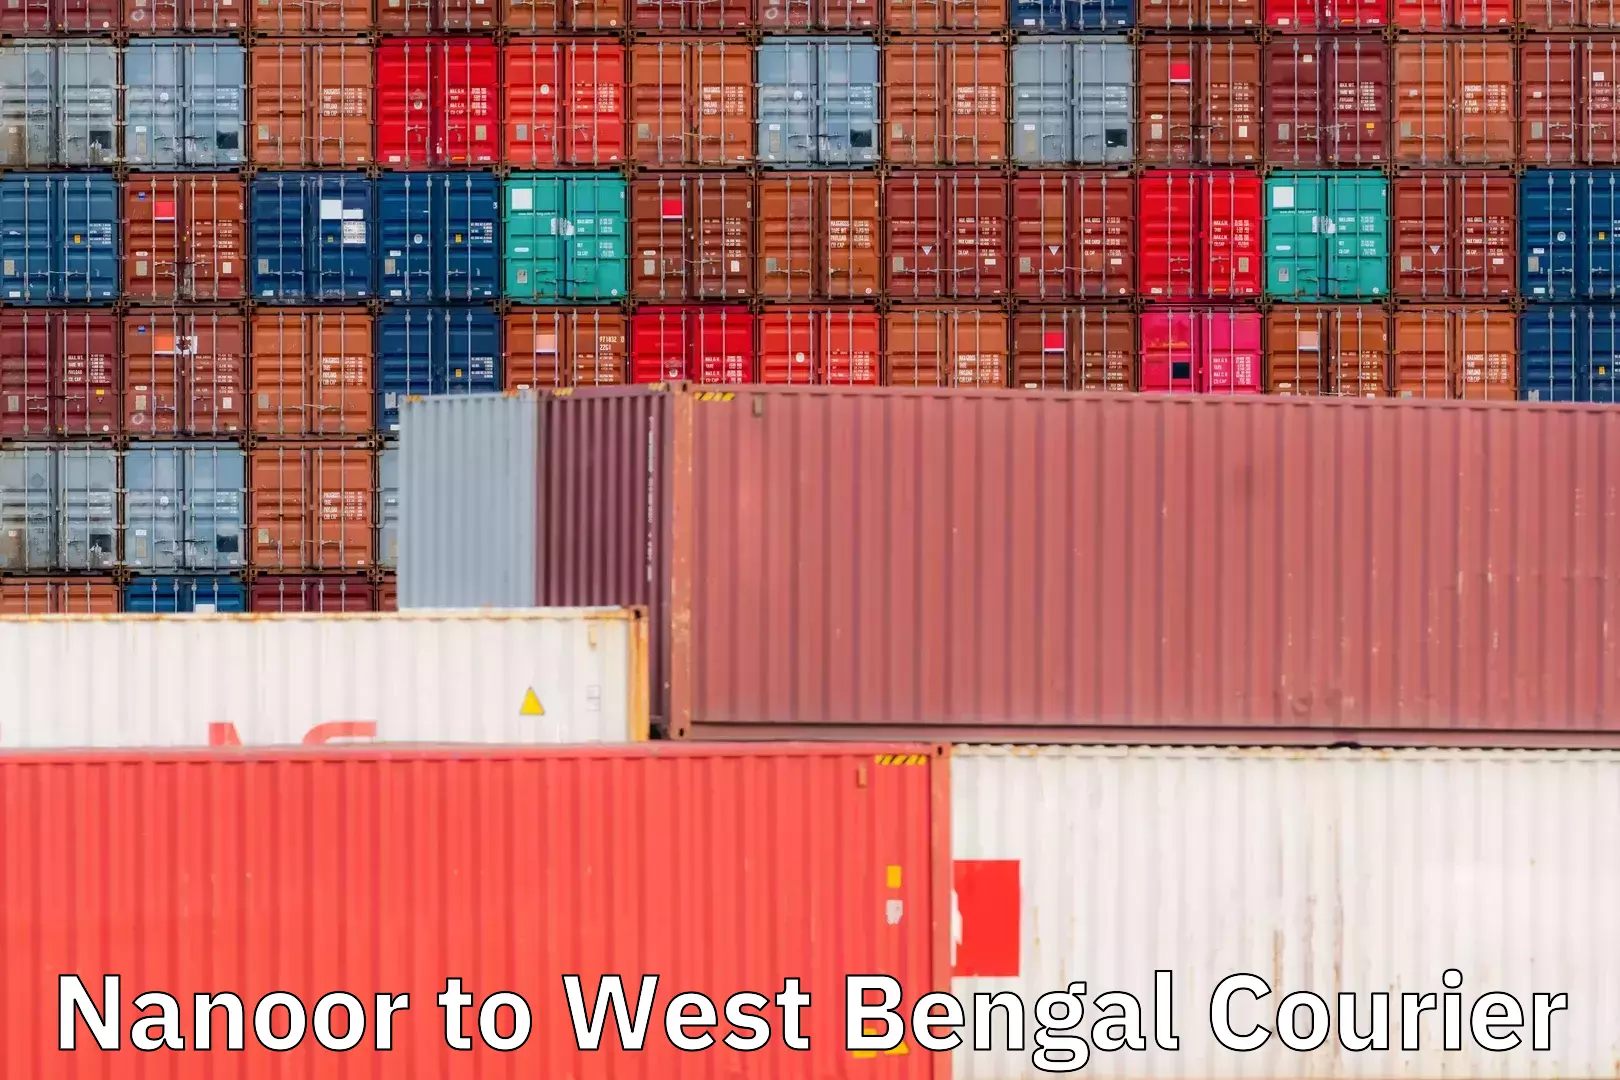 Next-day delivery options Nanoor to West Bengal